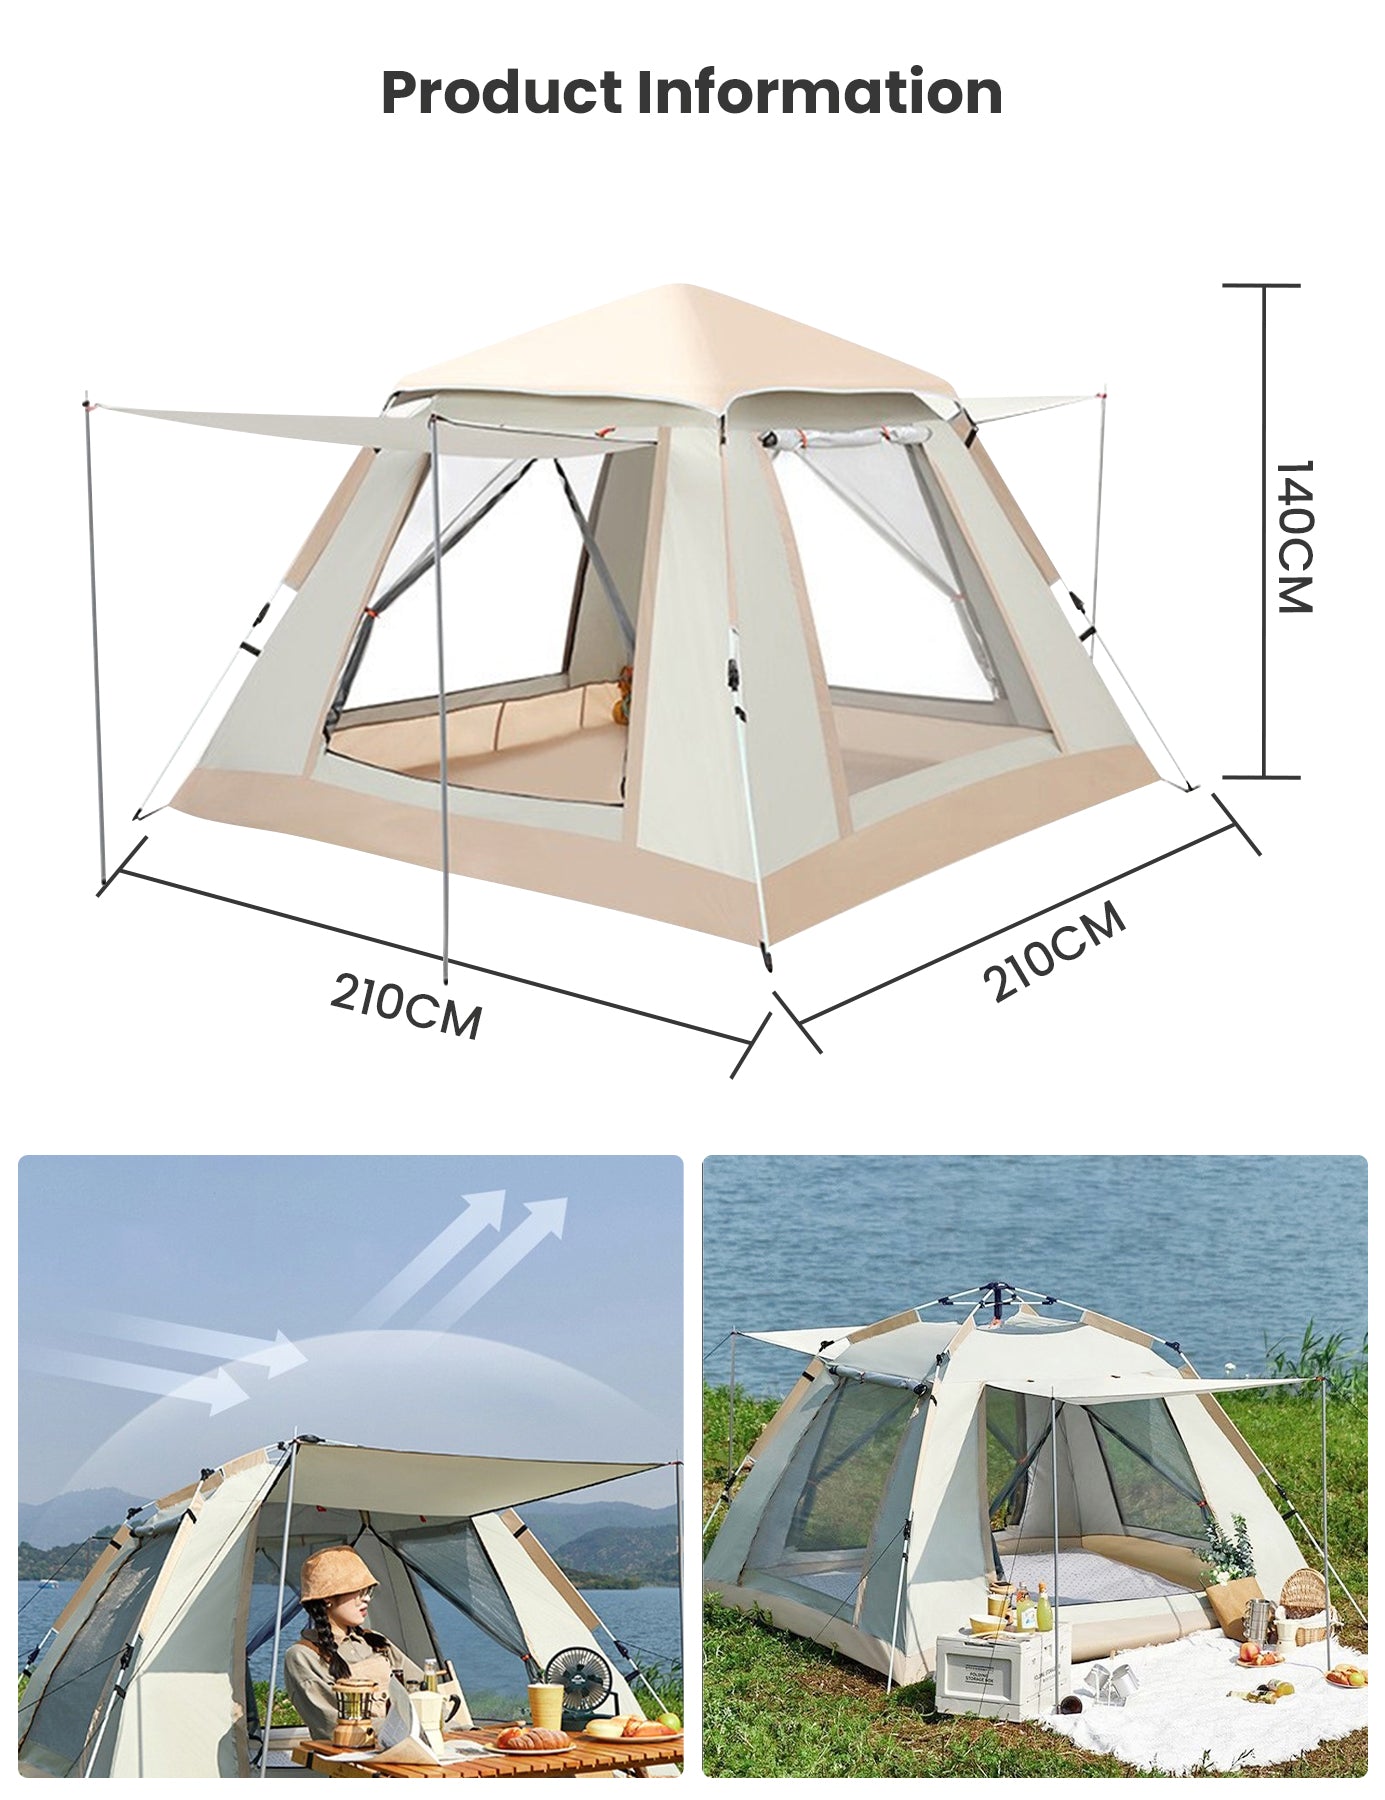 HiPEAK 3-4 Person Instant Pop Up Camping Tent